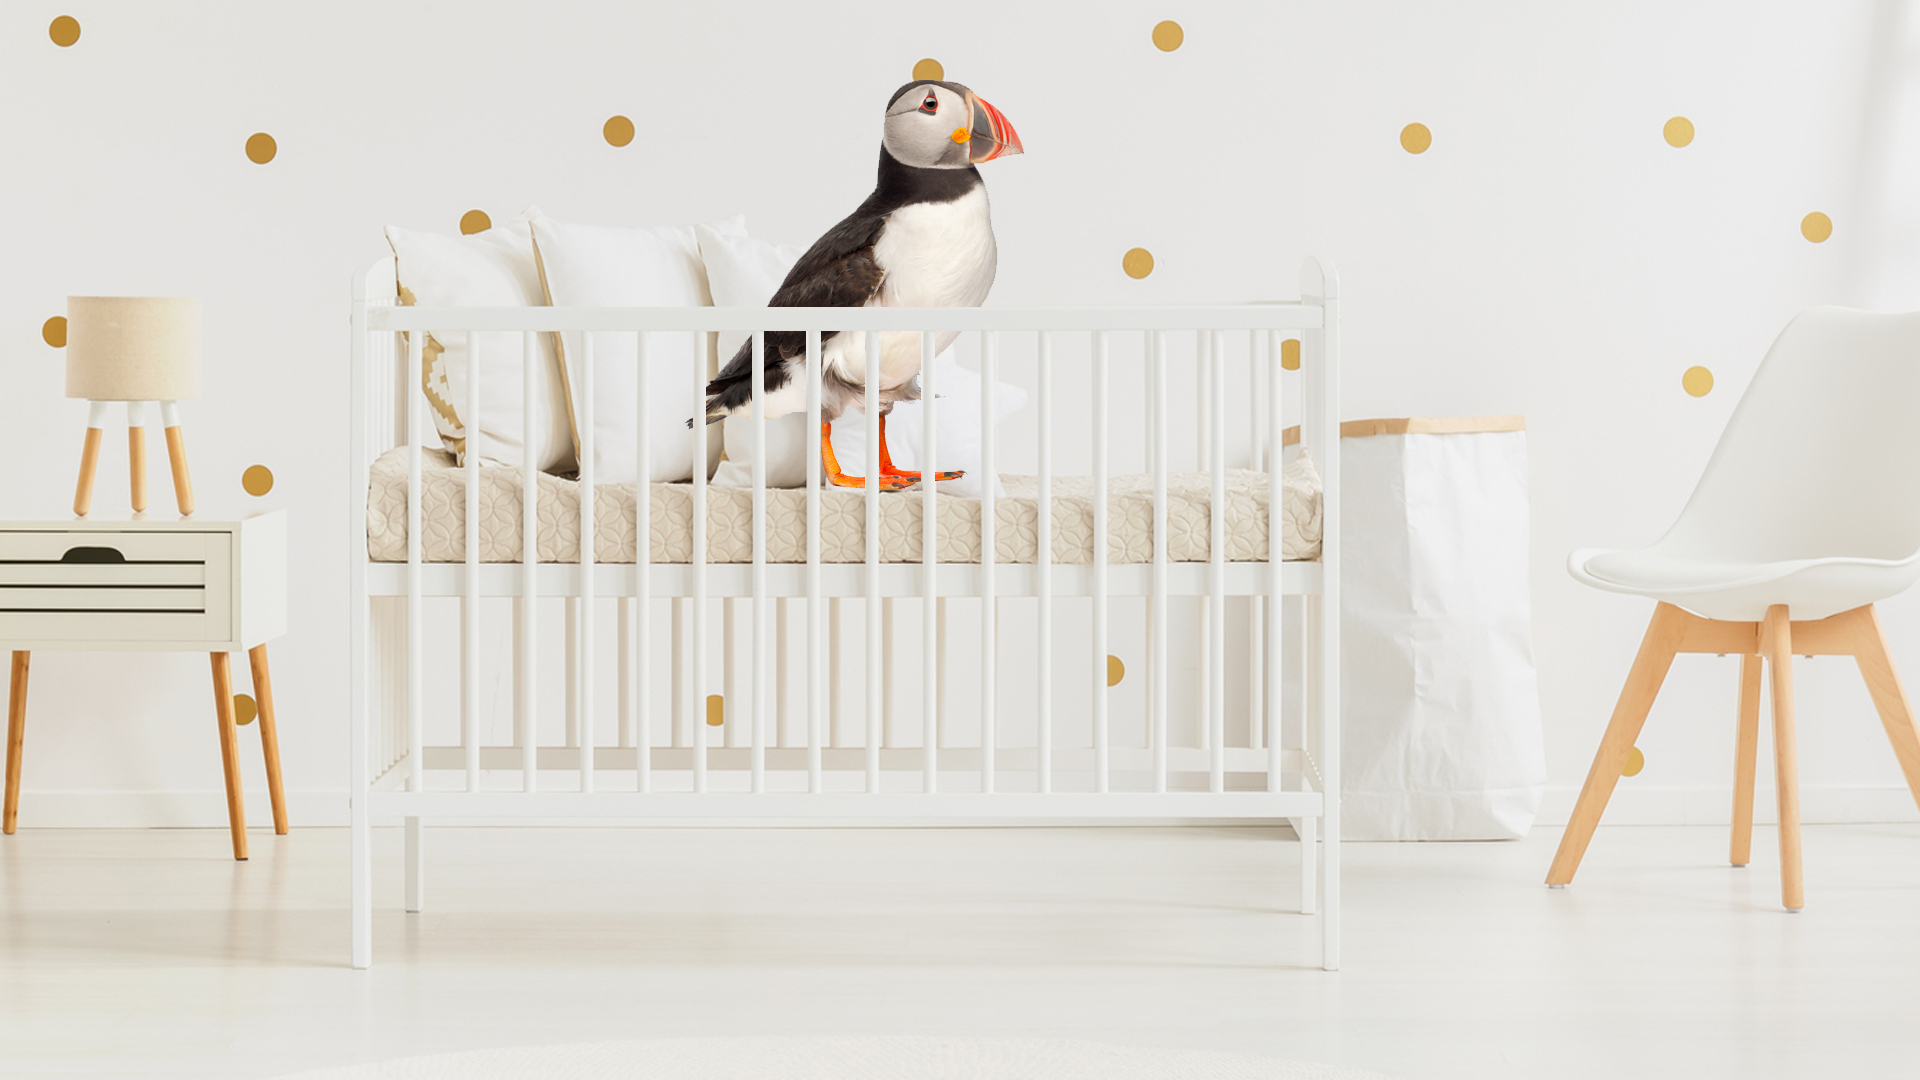 A puffin in a baby's cot